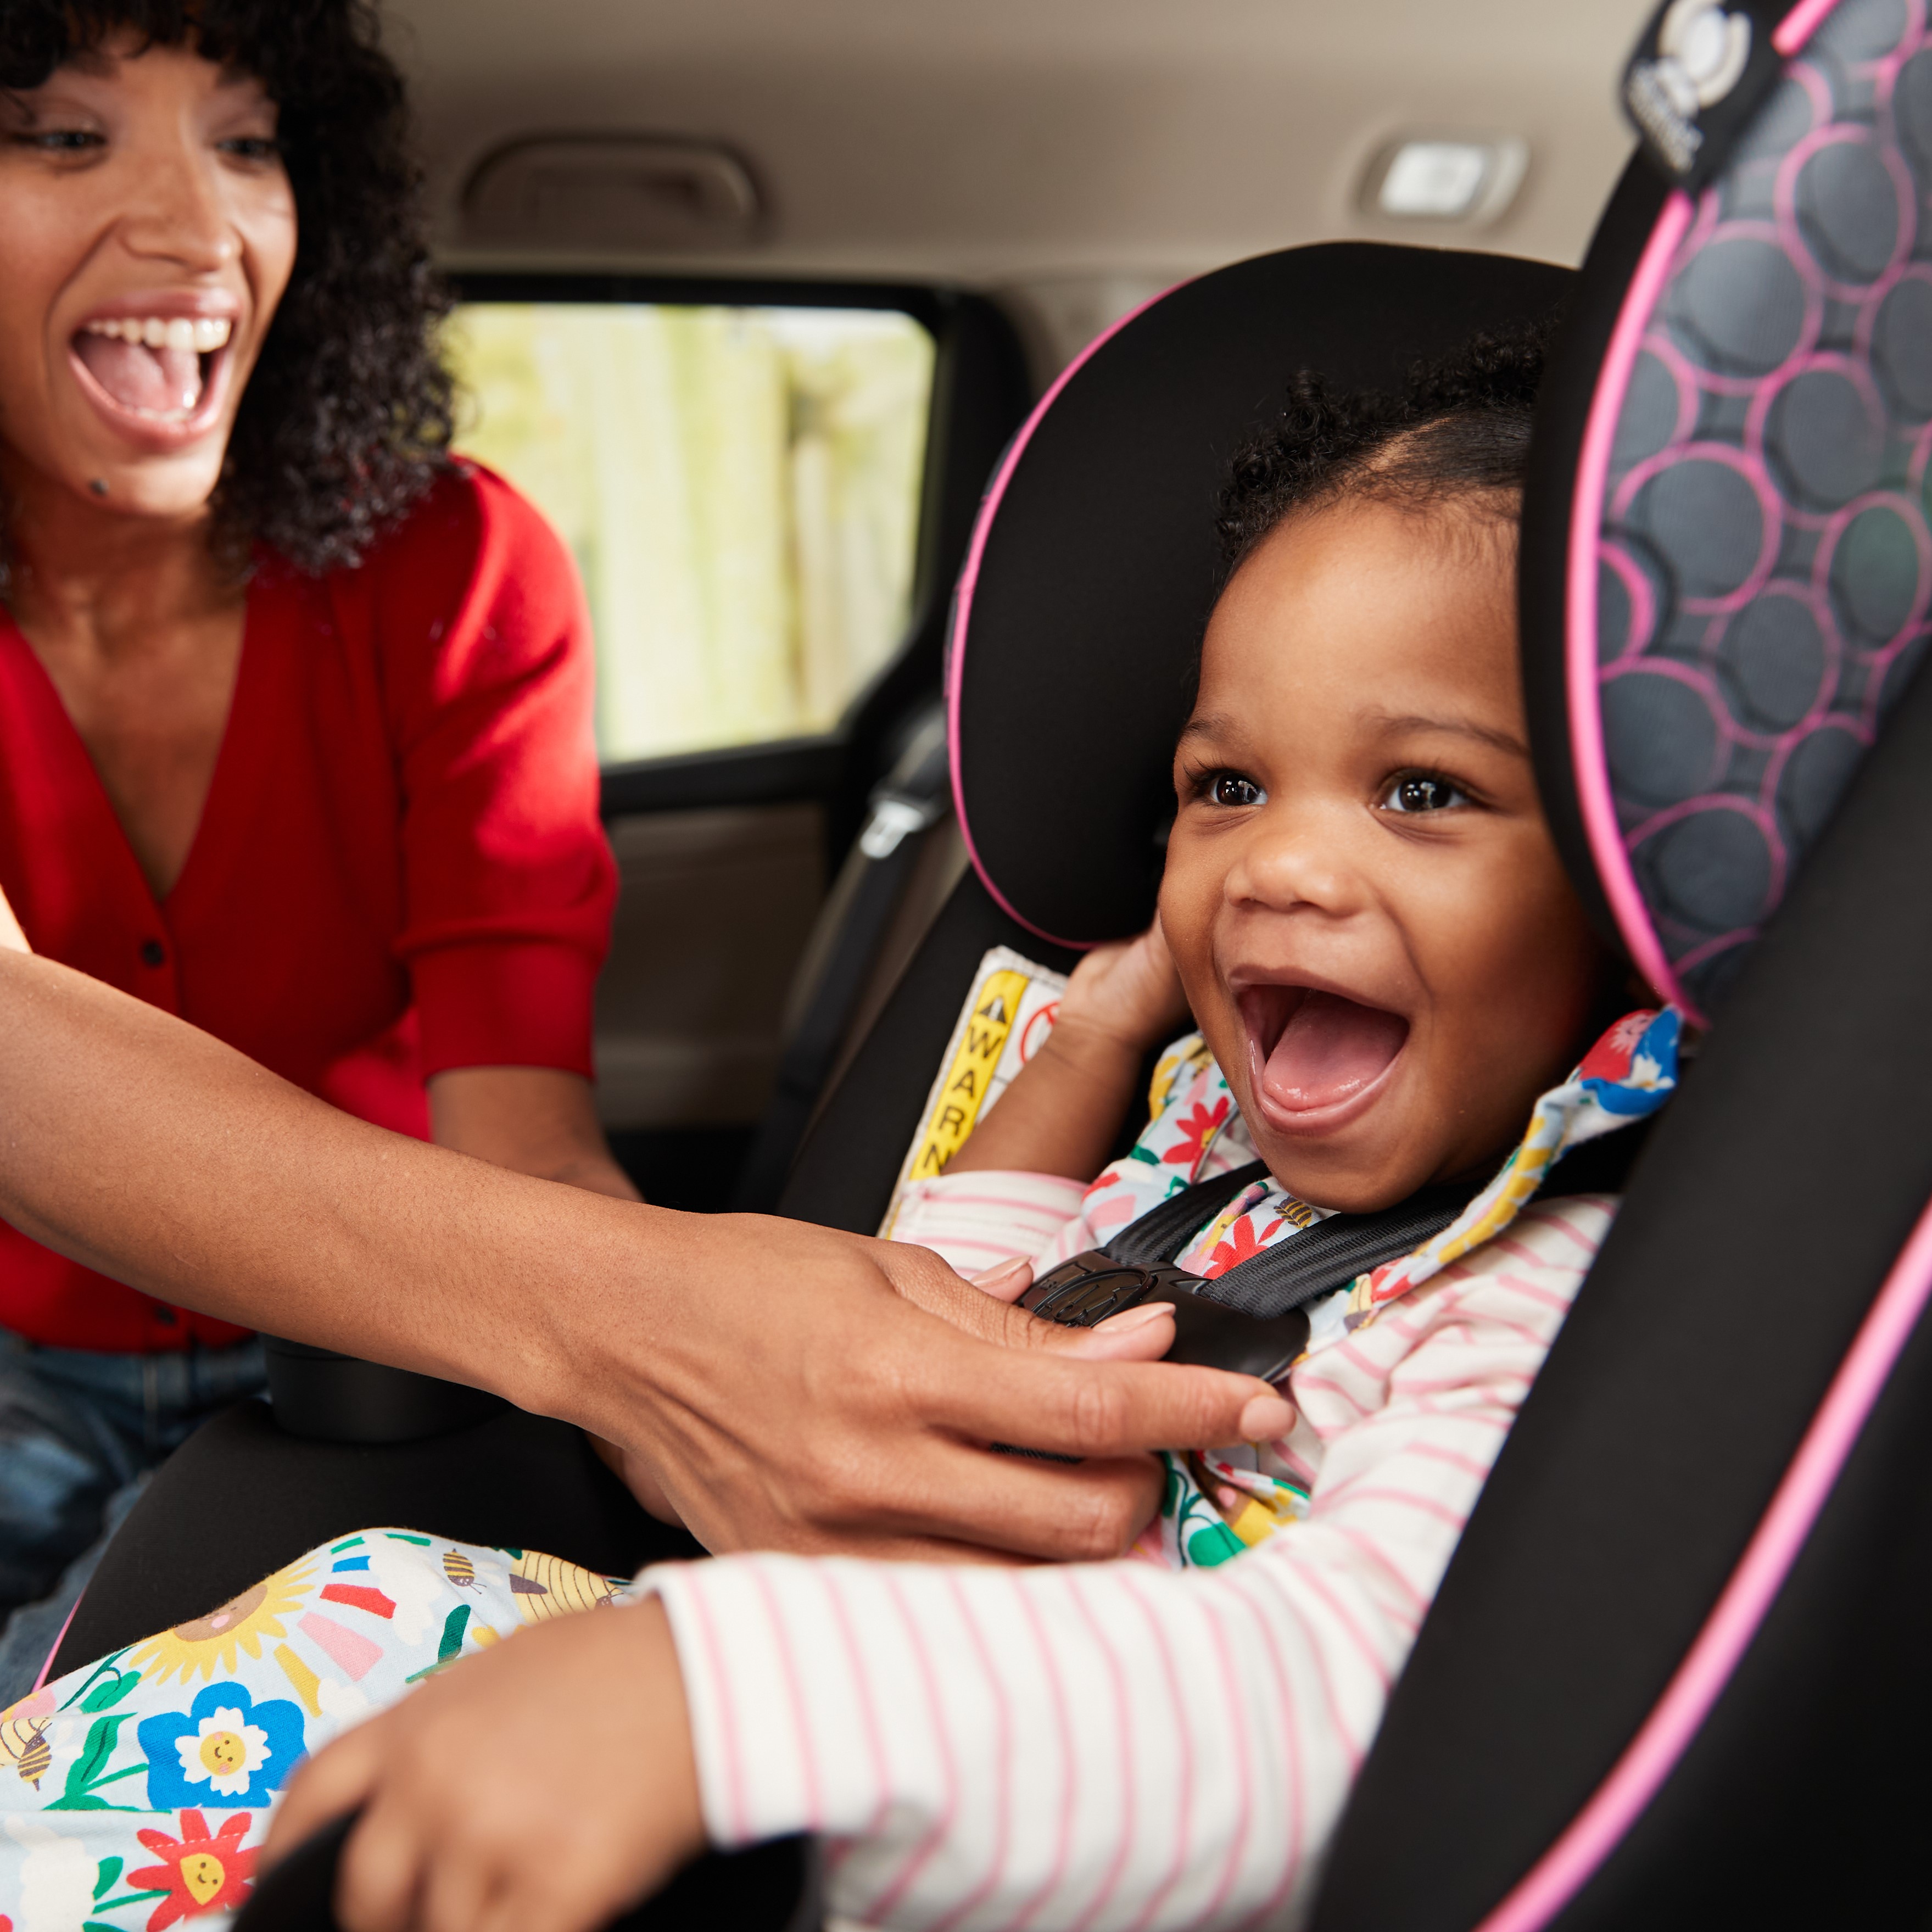 Cosco Kids Easy Elite Slim All-in-One Convertible Car Seat, Pink Rings - image 3 of 28